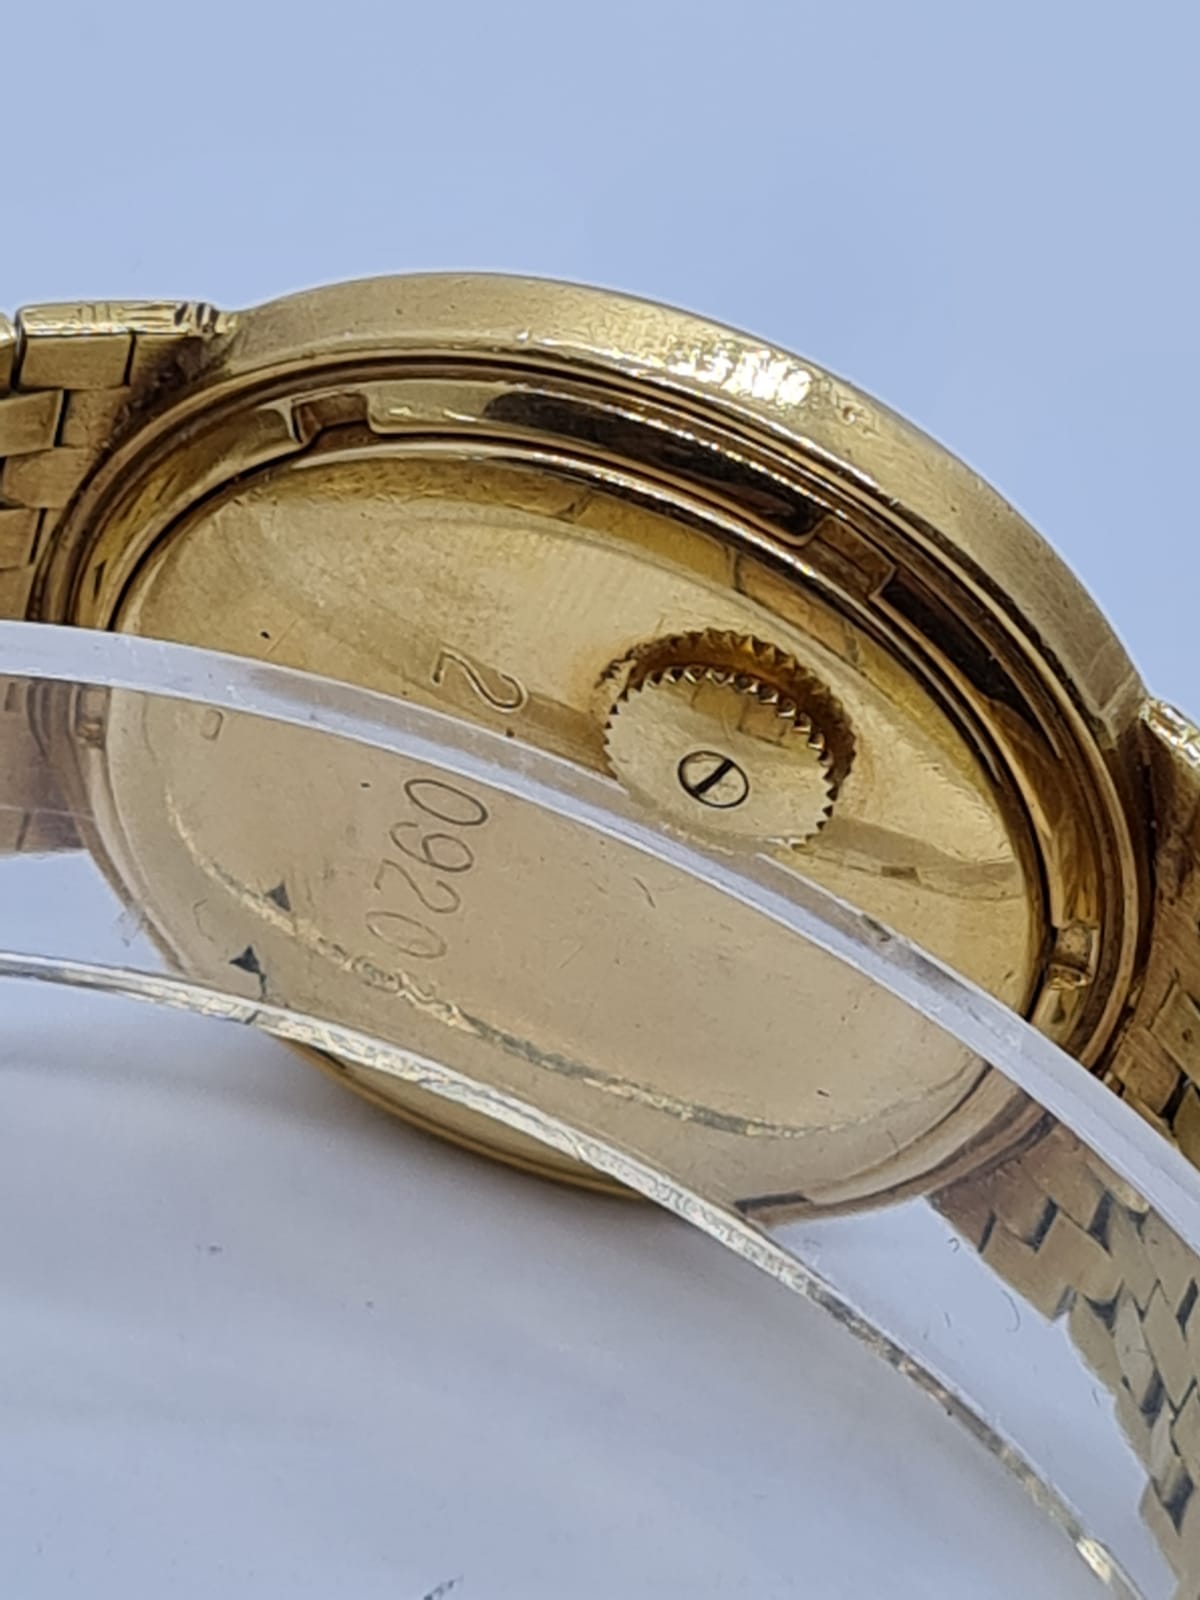 PATEK PHILIPPE GENEVE gent watch with blue face and 18k gold strap,36mm case 1970s model - Image 15 of 17